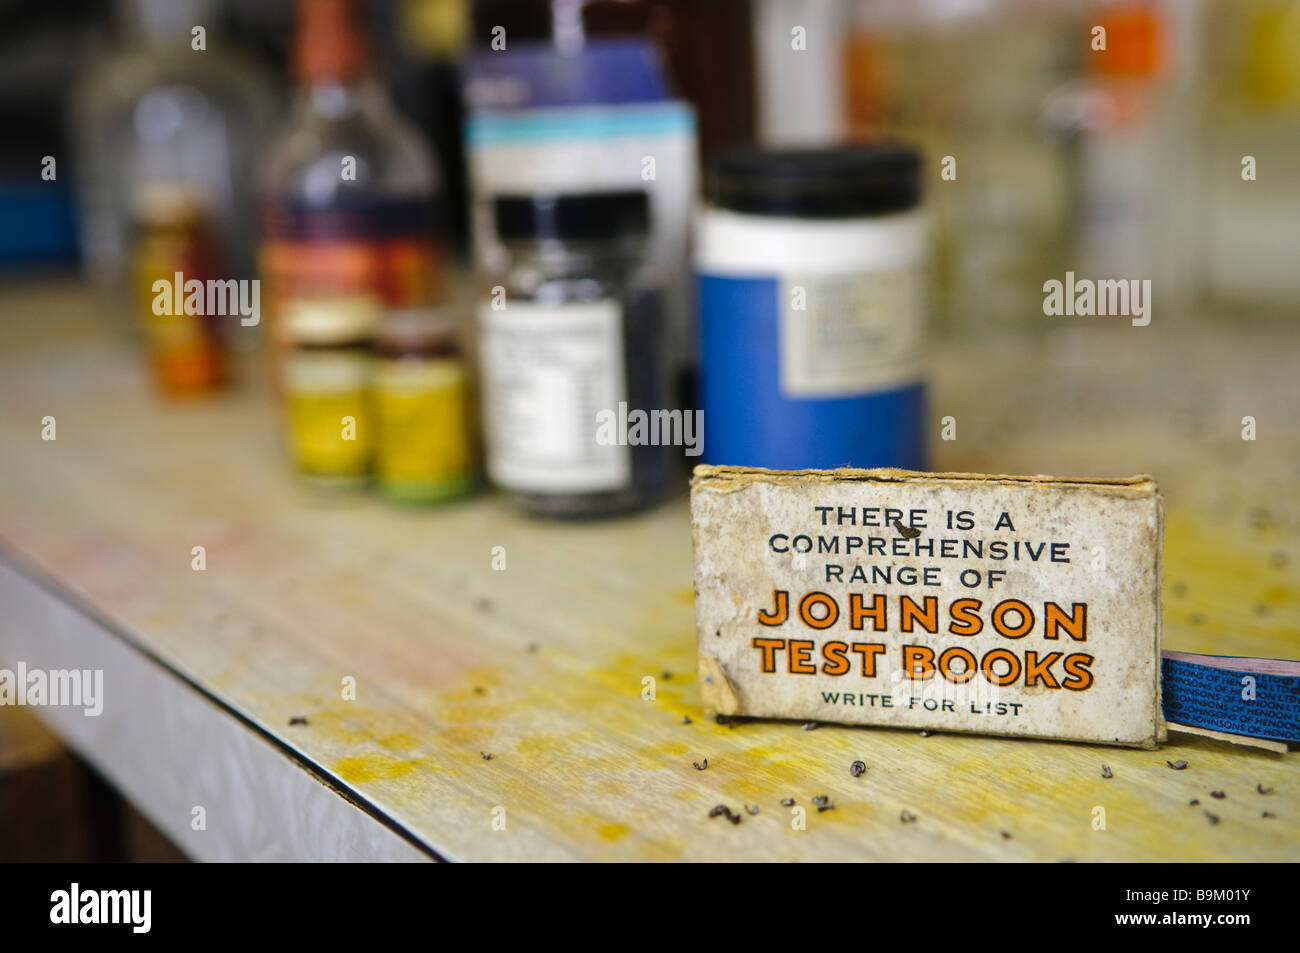 Box of Johnson Test books on a messy laboratory bench, with bottles and jars of chemicals in the background. Stock Photo